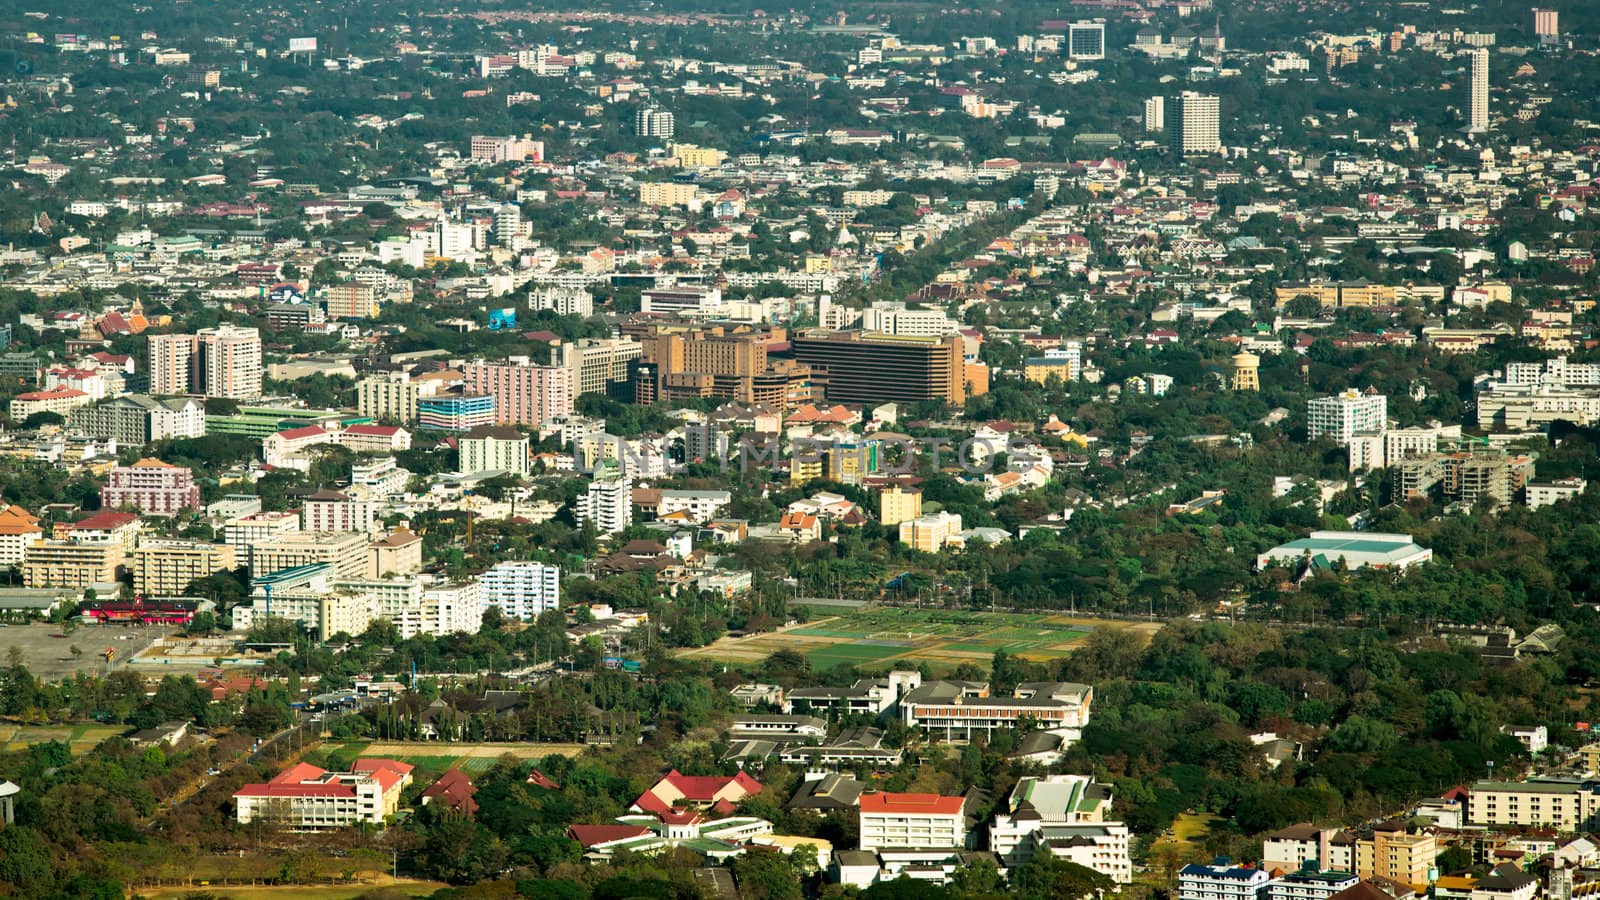 View of Chiang Mai city from viewpoint on Doi Suthep, Northern Thailand